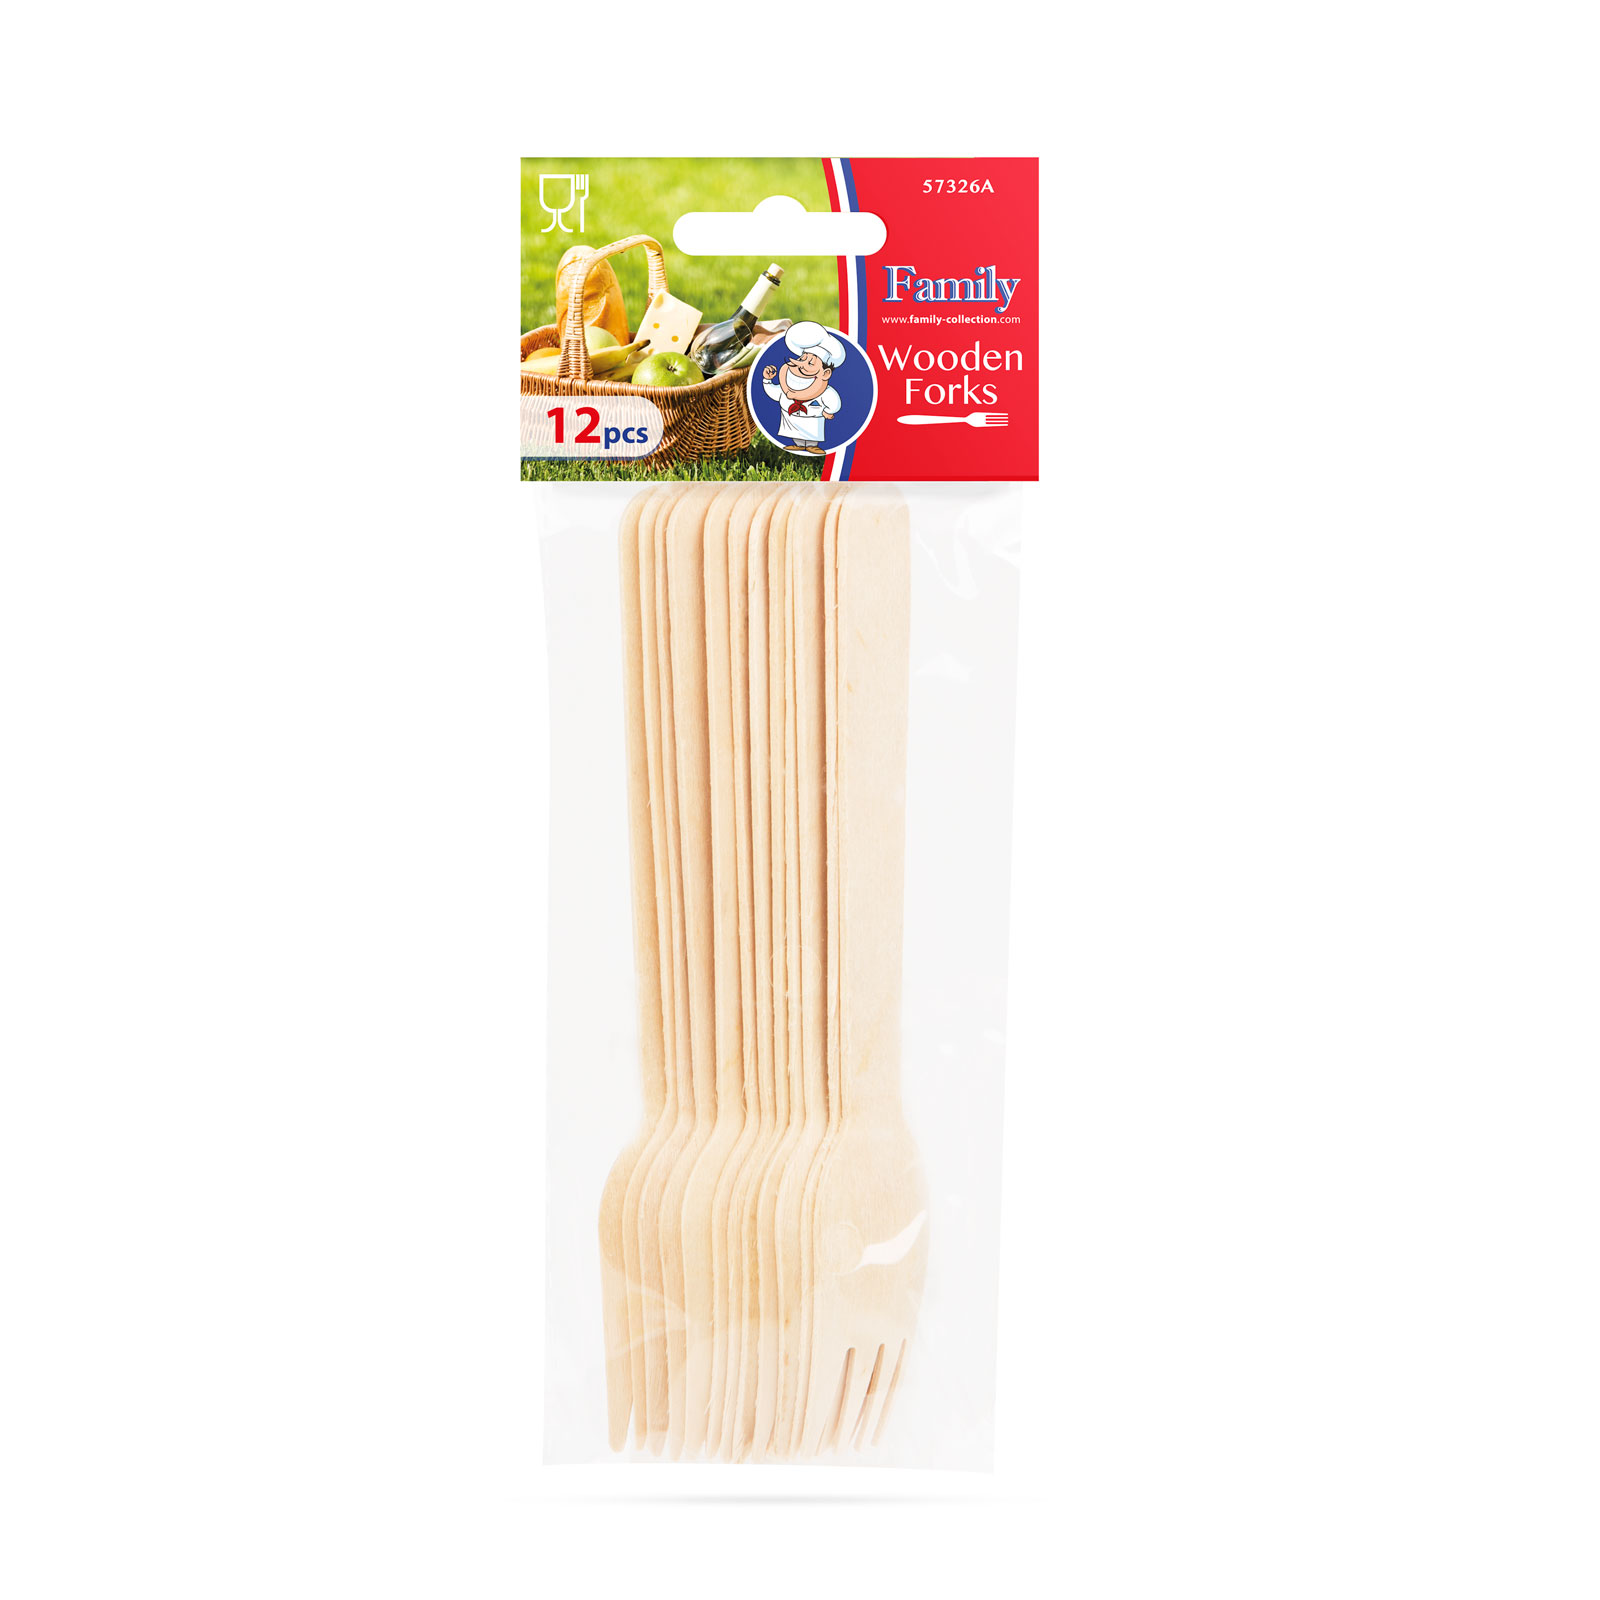 Wooden cutlery set - fork - 12 pieces thumb